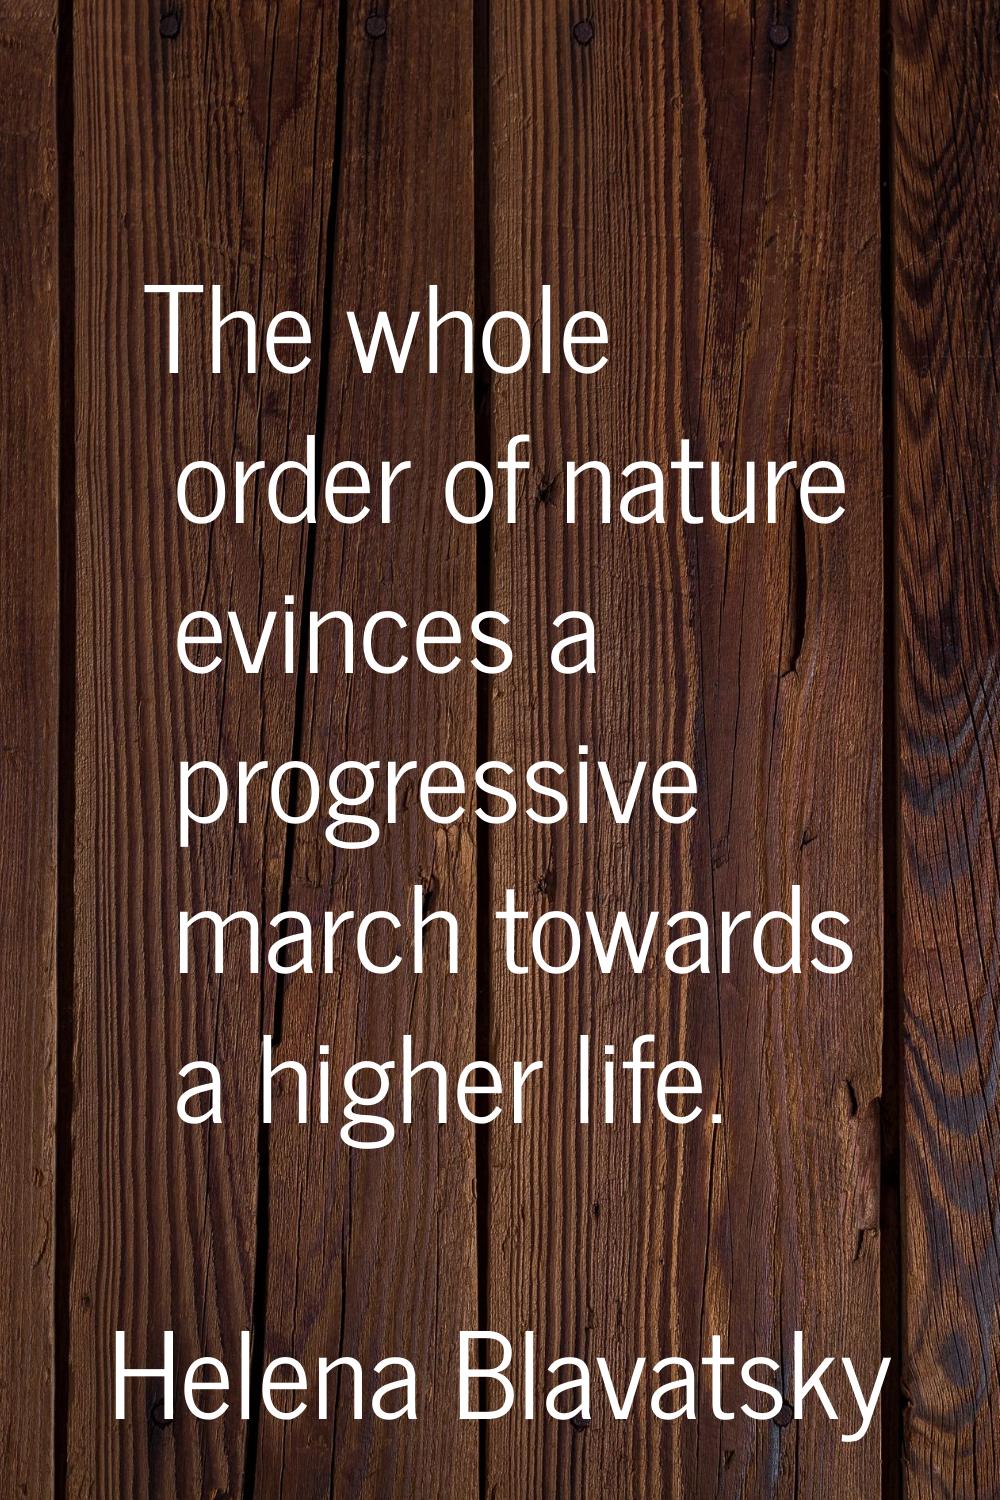 The whole order of nature evinces a progressive march towards a higher life.